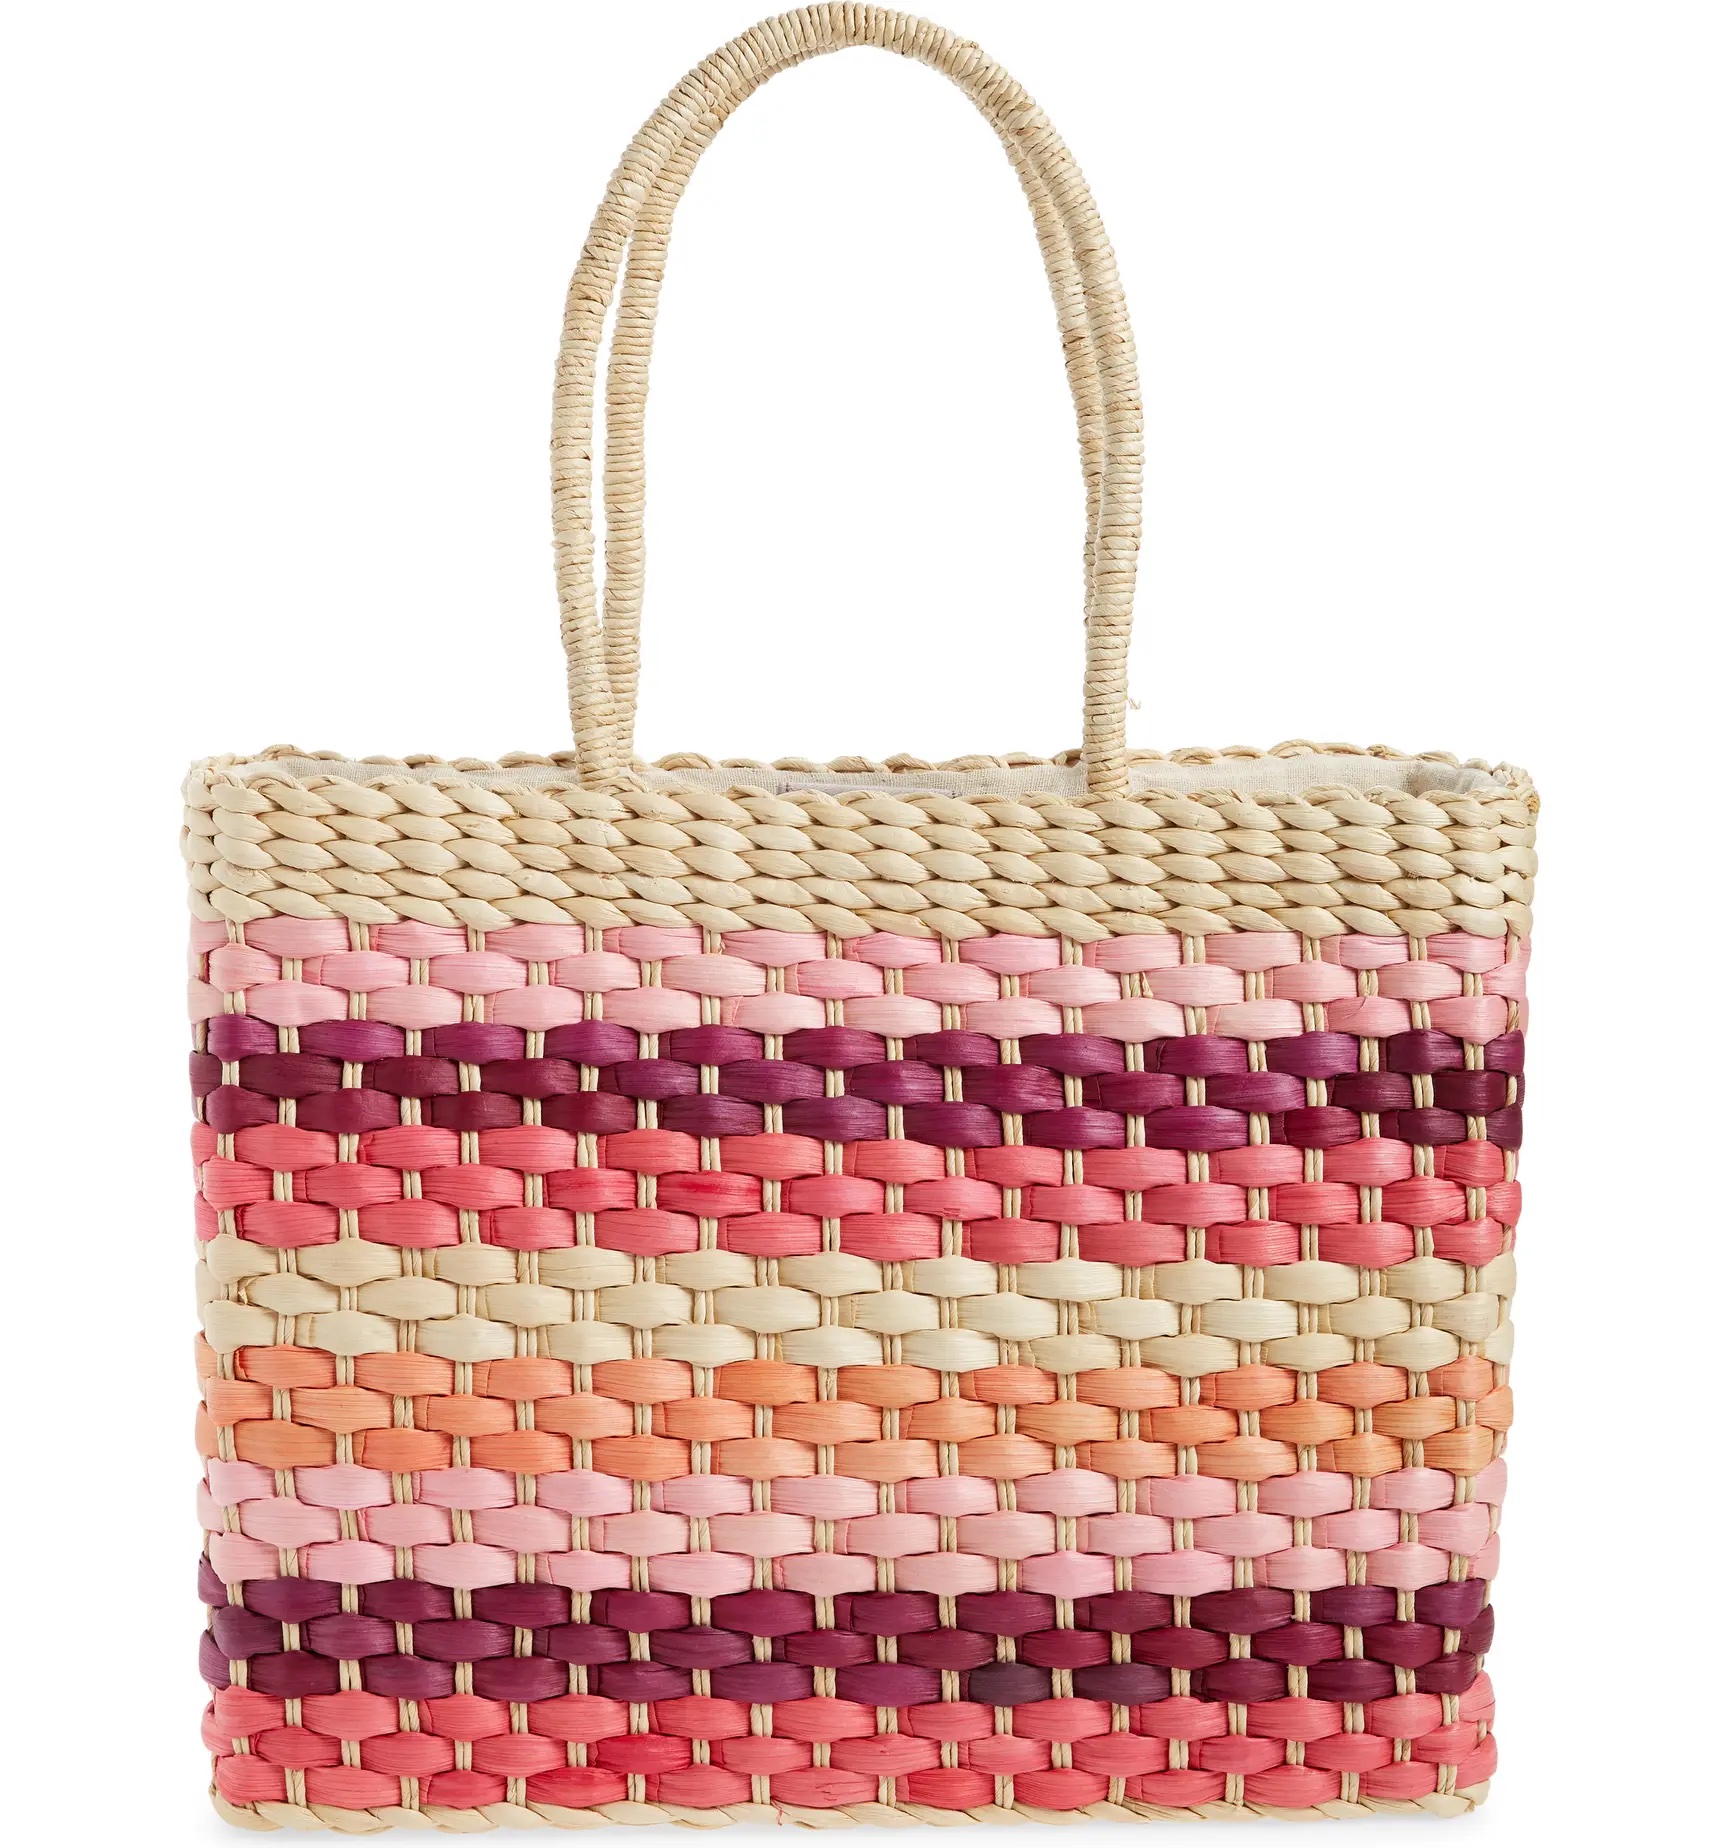 Fashionable beach totes for summer: This woven bag from btb Los Angeles goes from the beach to the bar seamlessly.